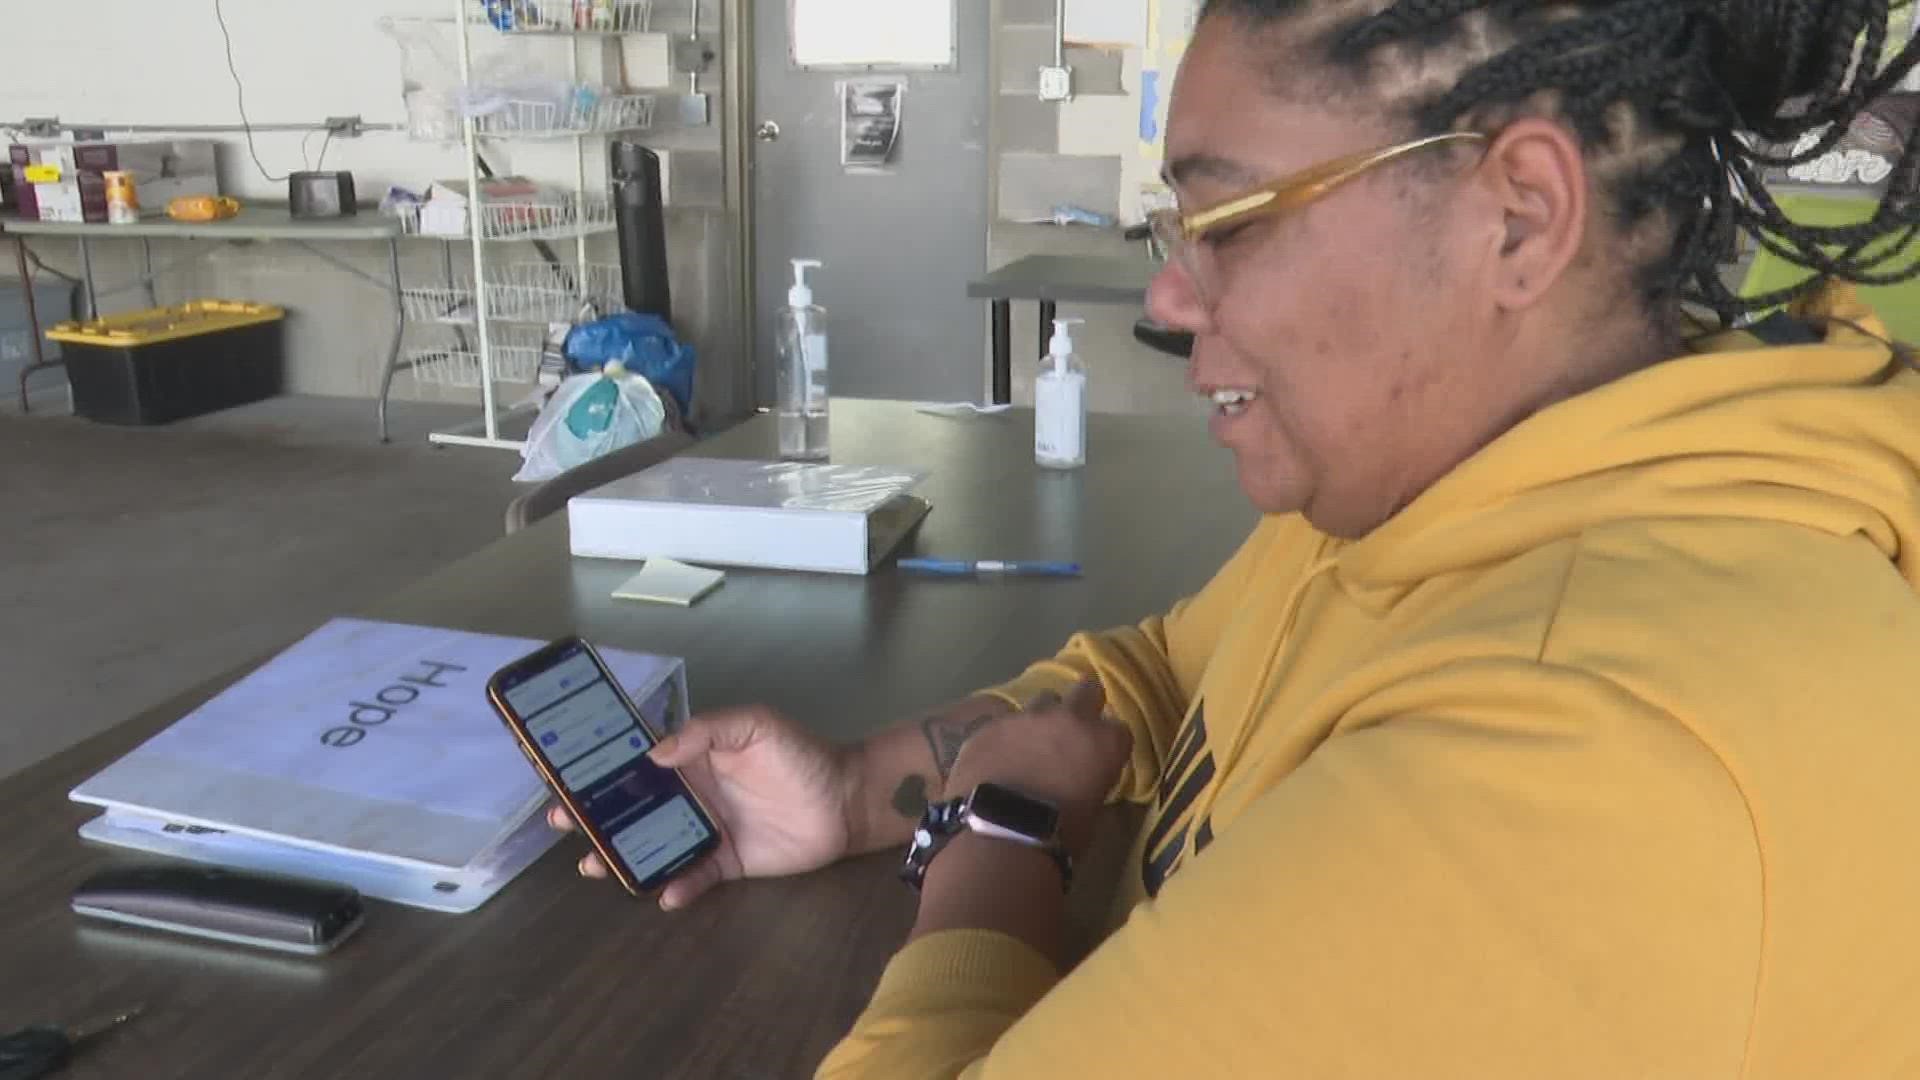 The Samaritan app helps Louisvillians support homeless people financially with just a click of a button.